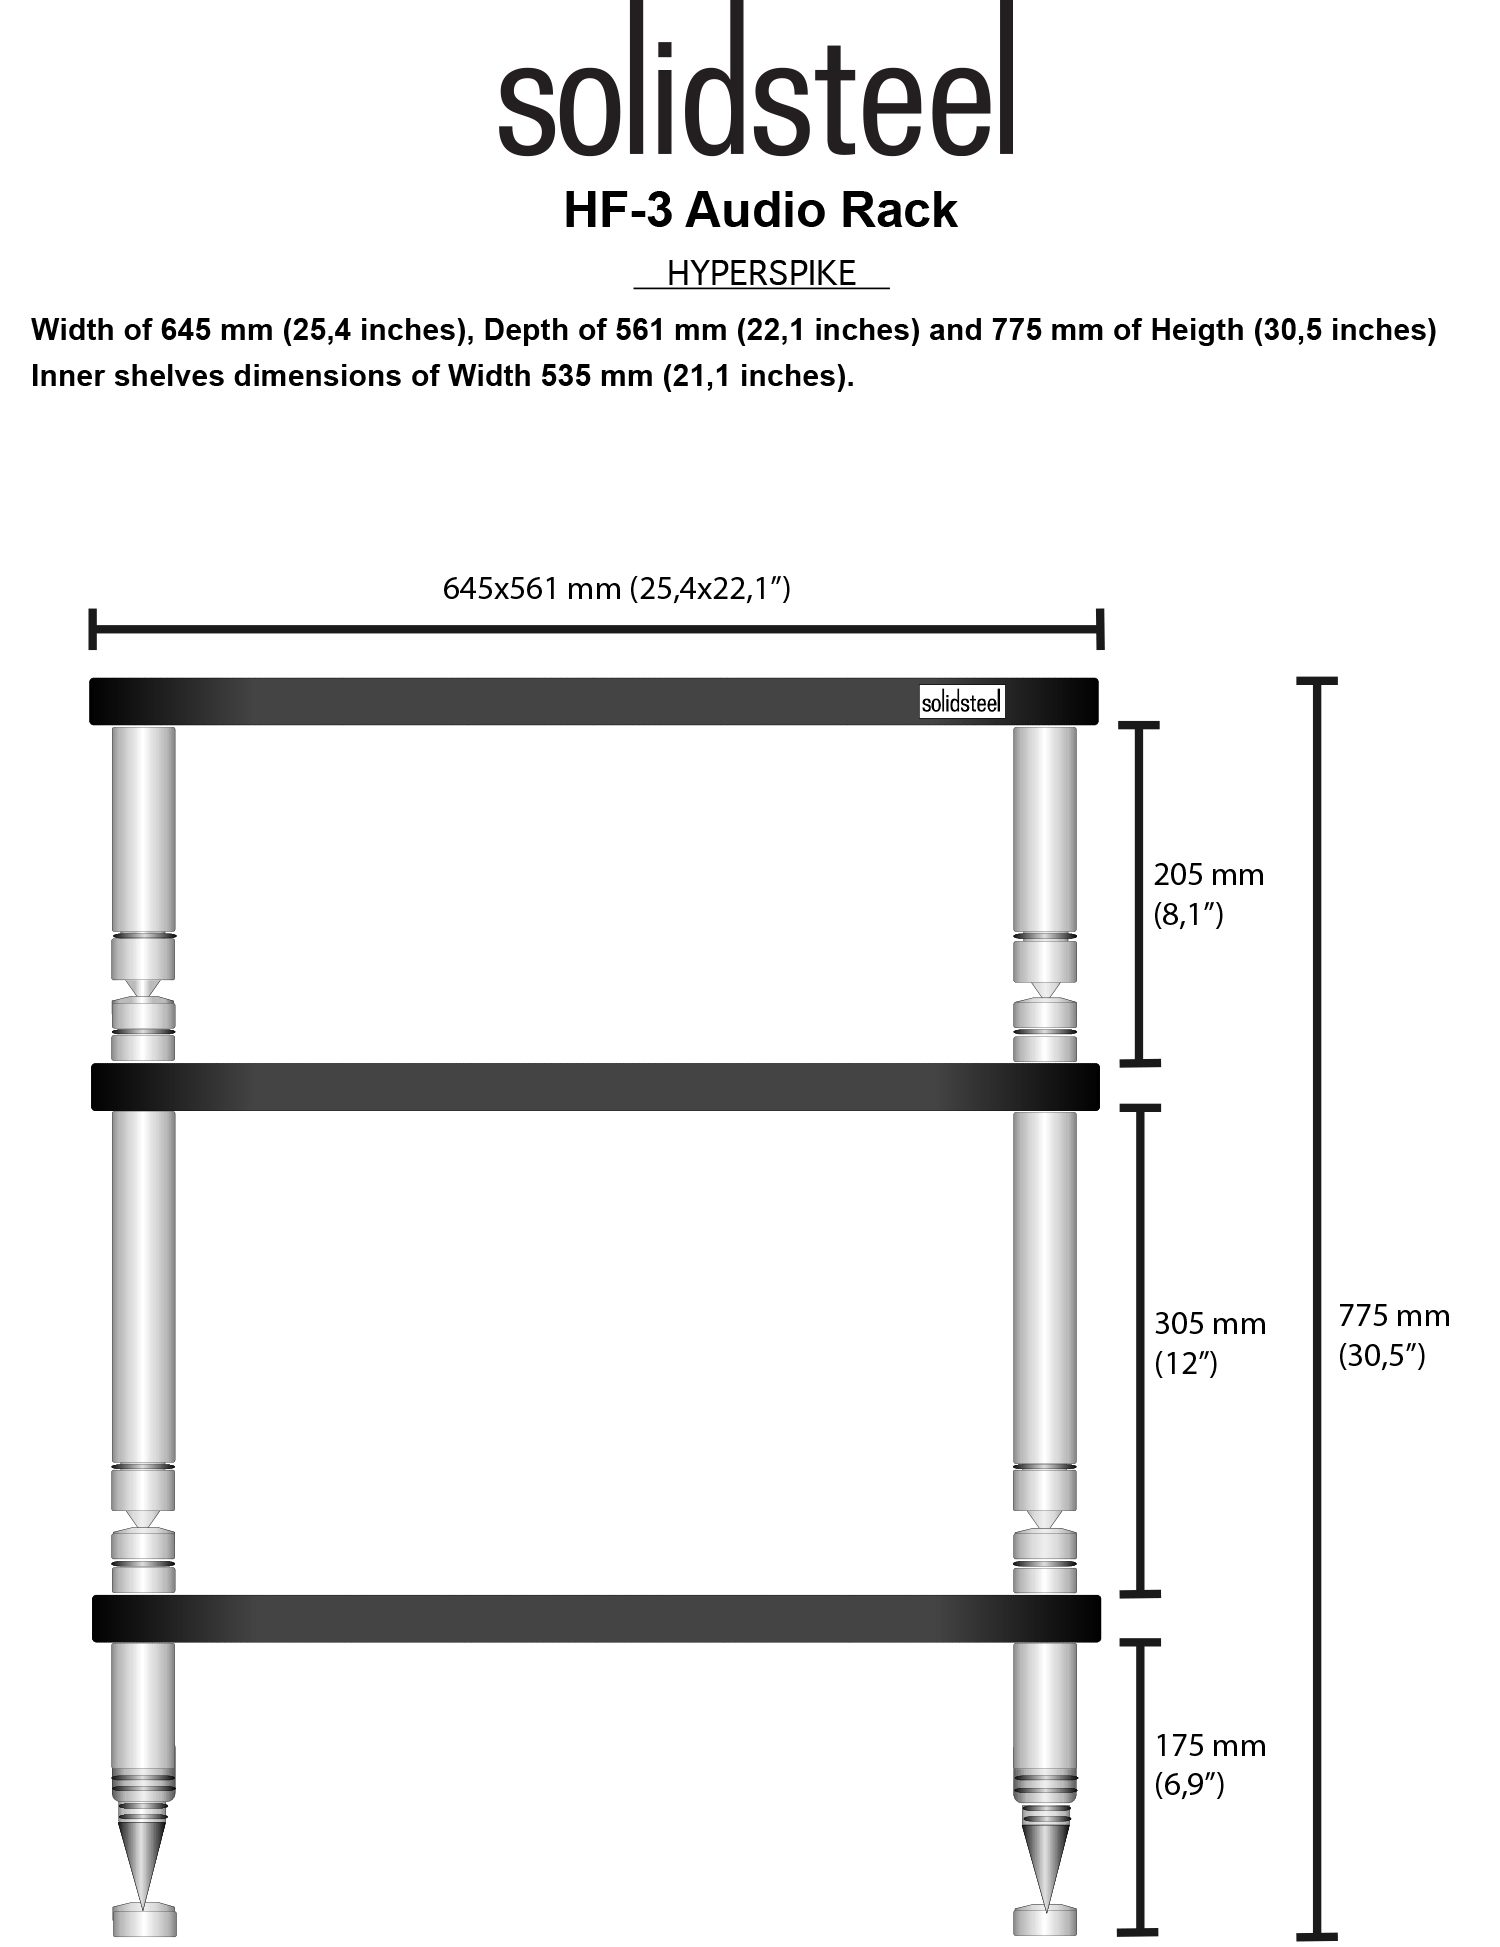 Solidsteel HF-3 dimension taille rack